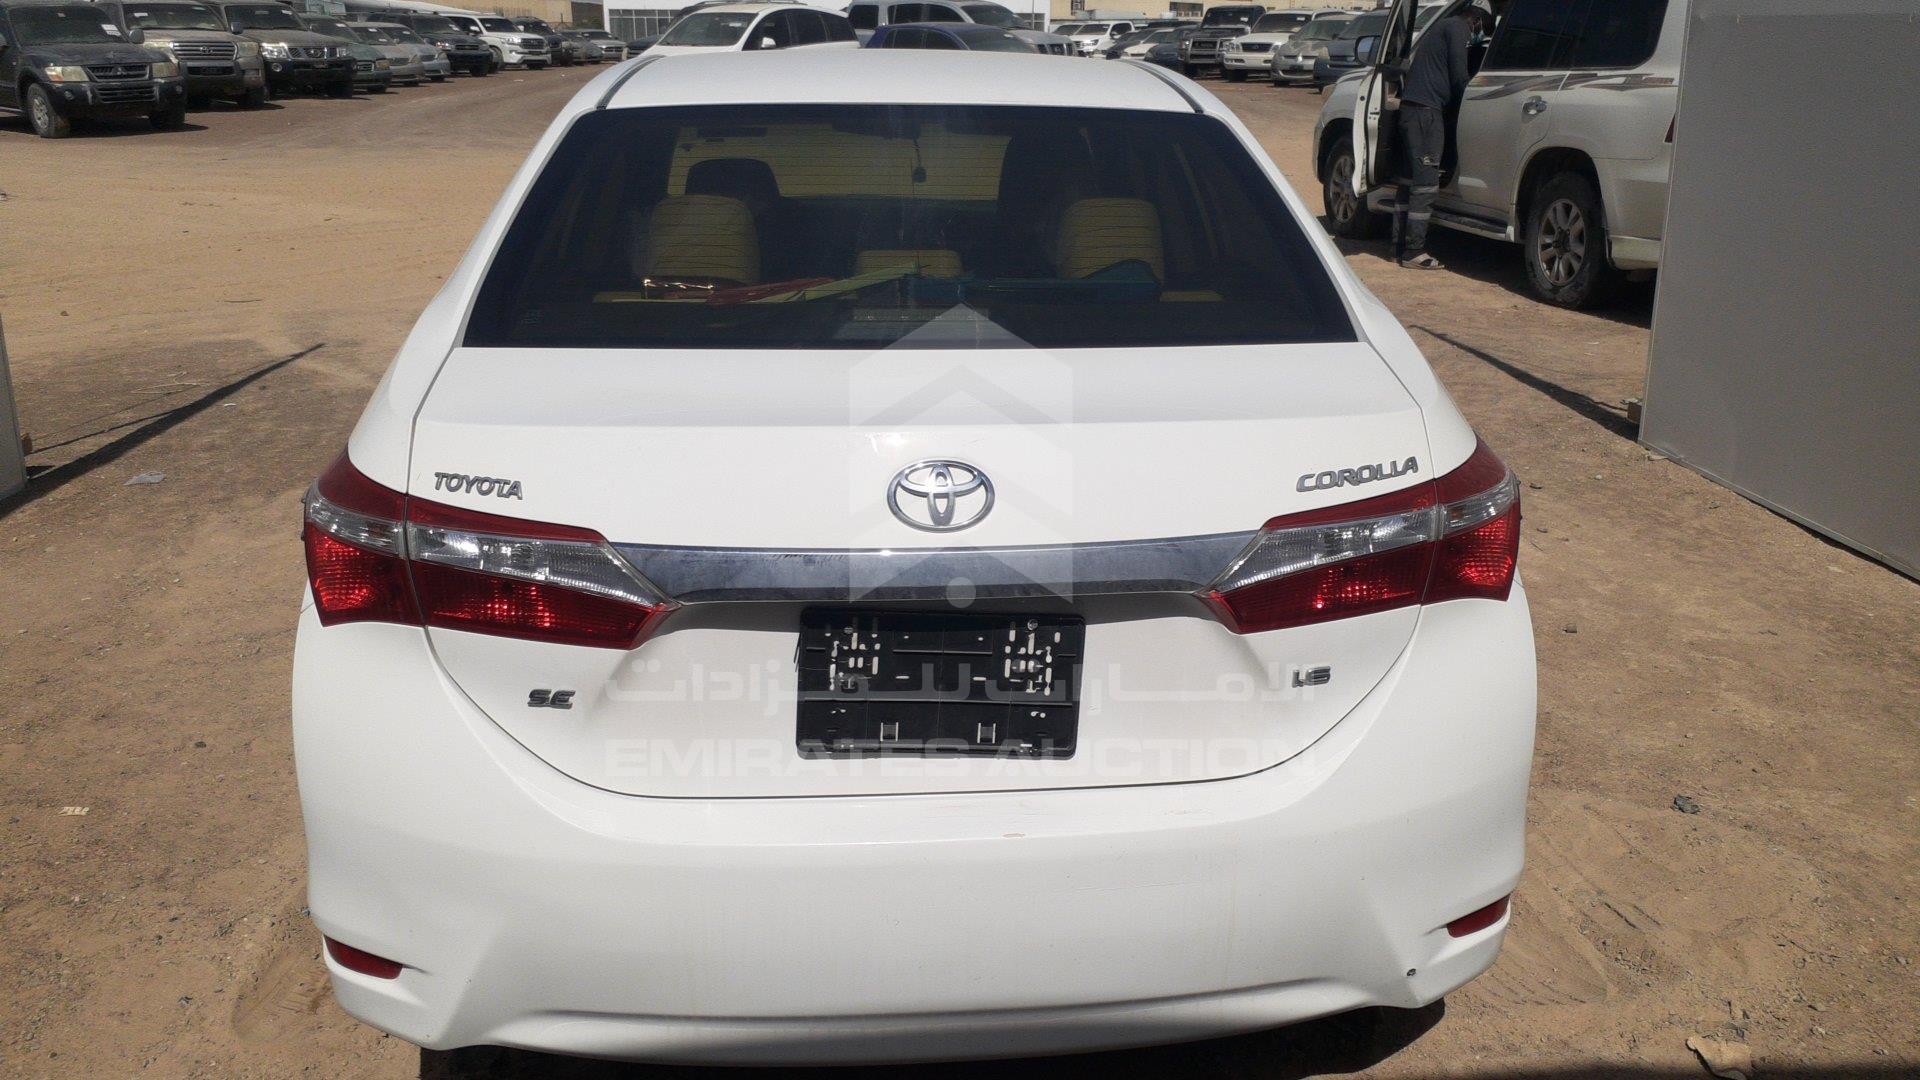 image 3 16 - corolla 2014 price 7000 in auction